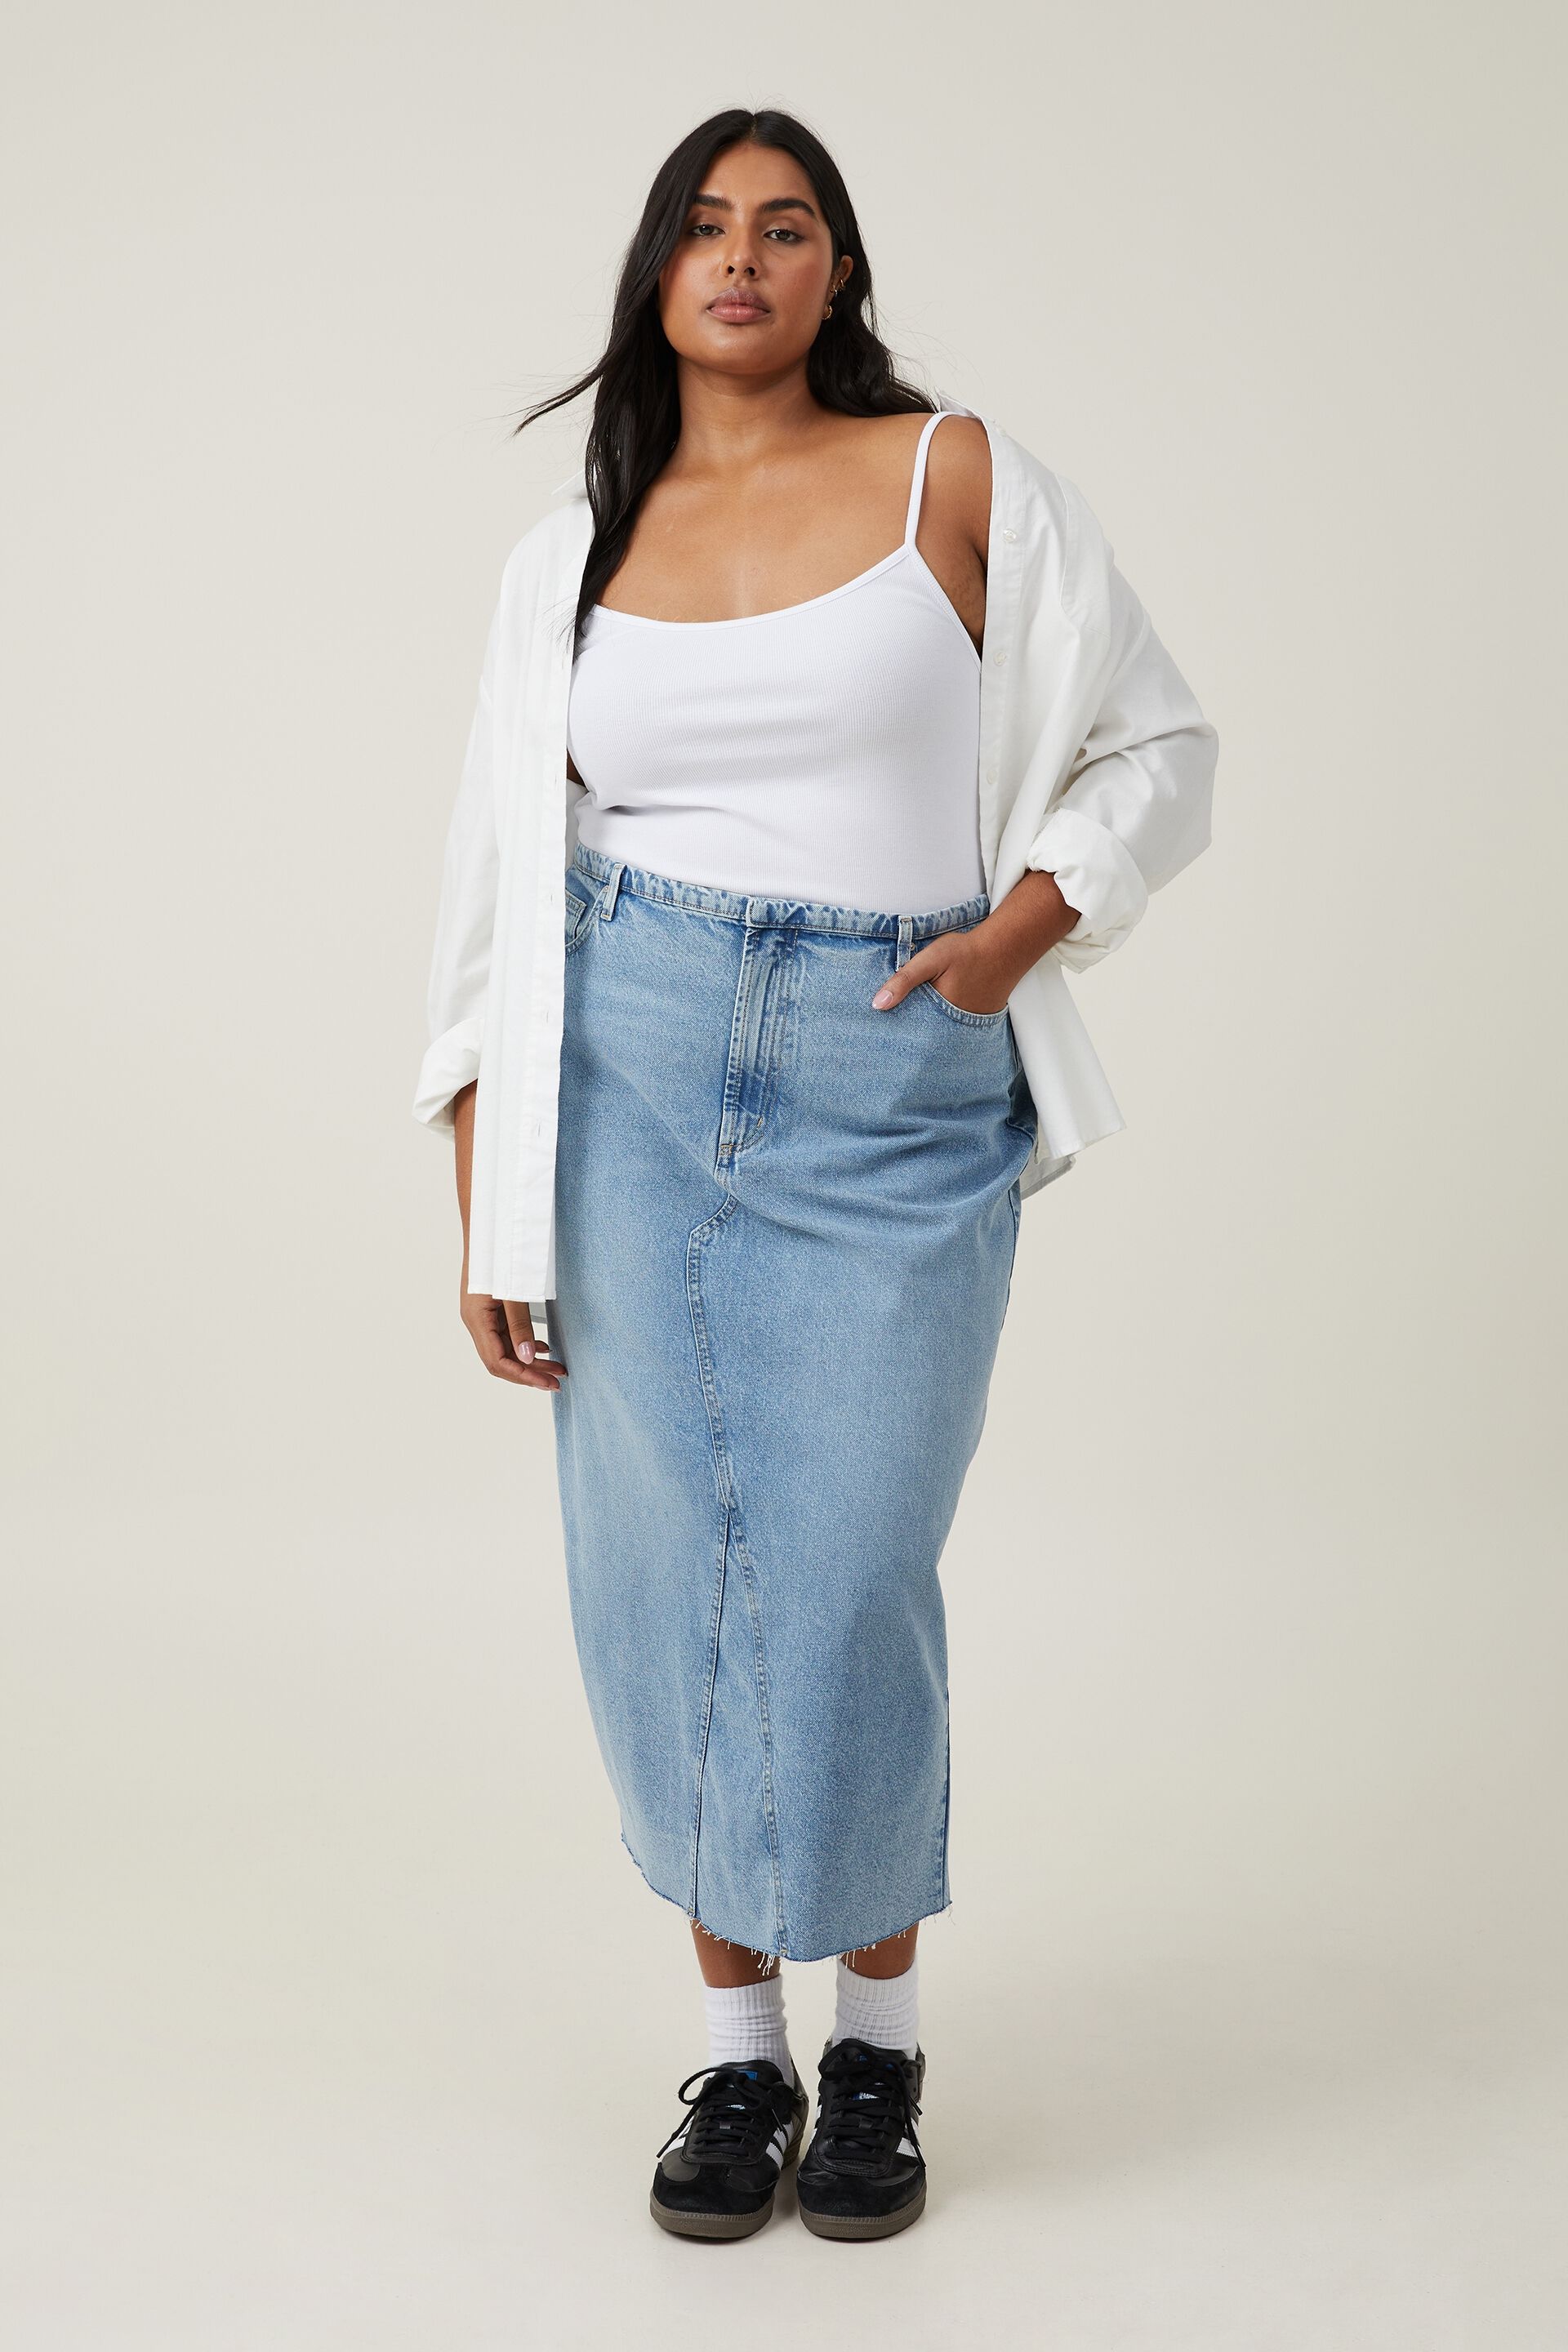 Trendy Plus Size Outfit Ideas For A Curated Wardrobe  Bewakoof Blog